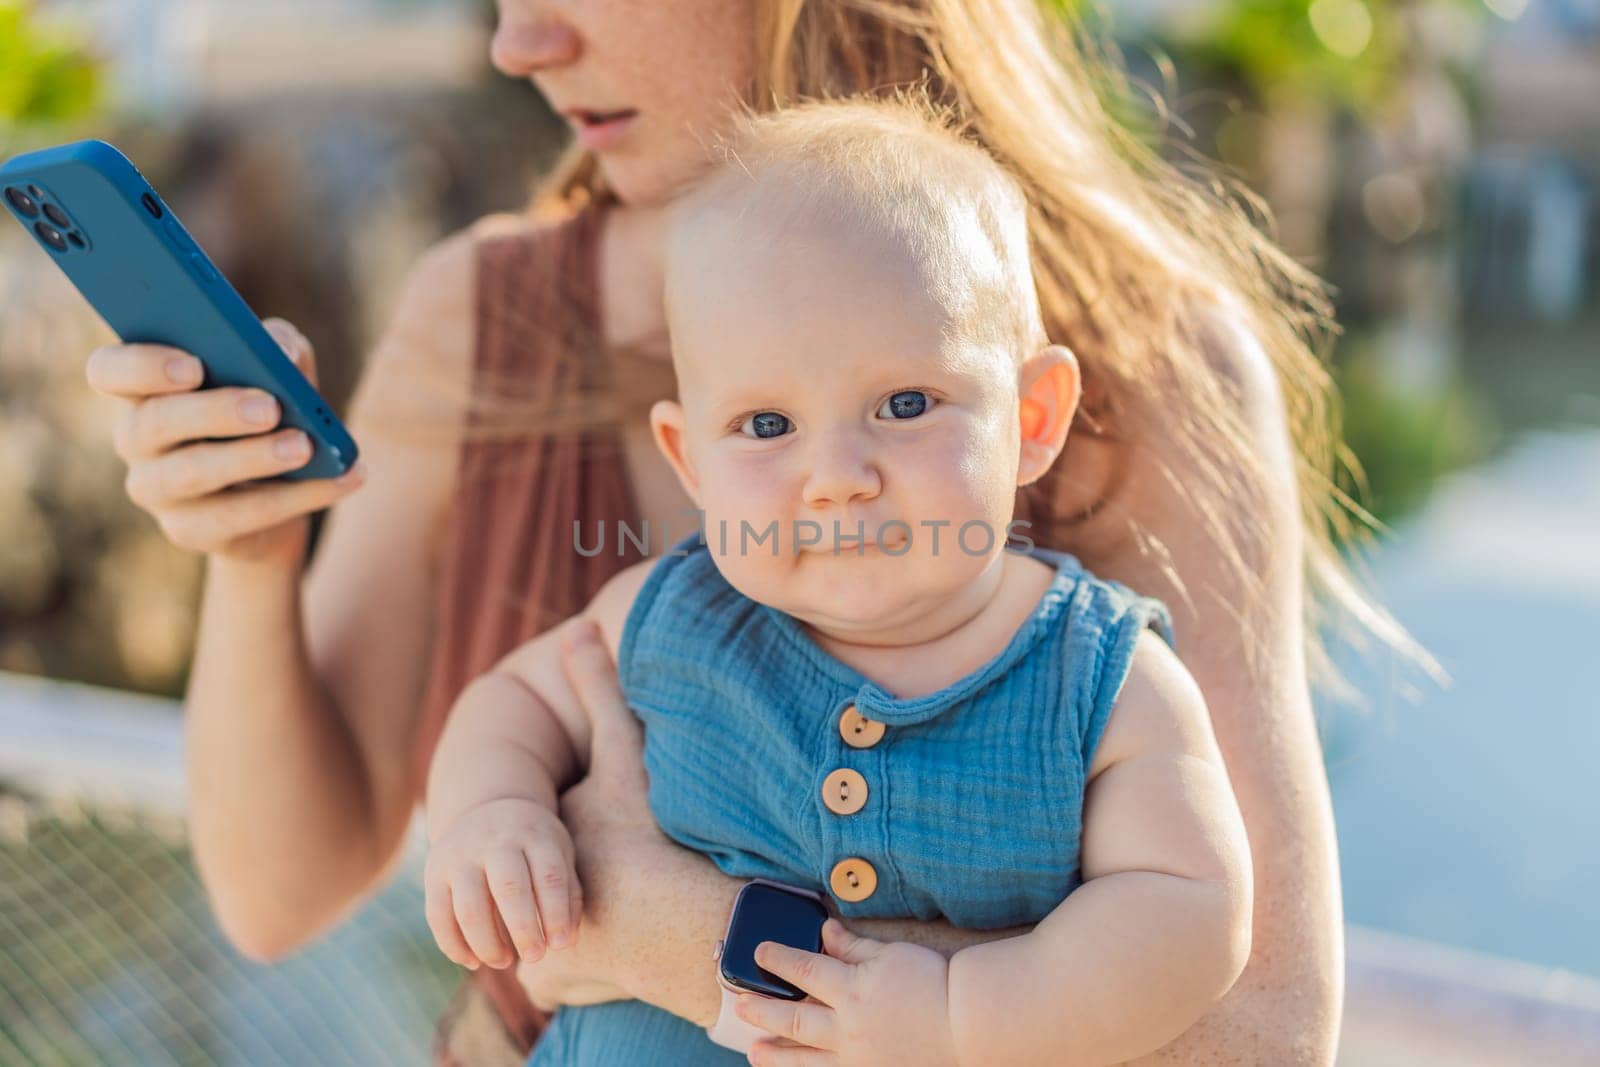 Mom holds her adorable baby while holding a smartphone.